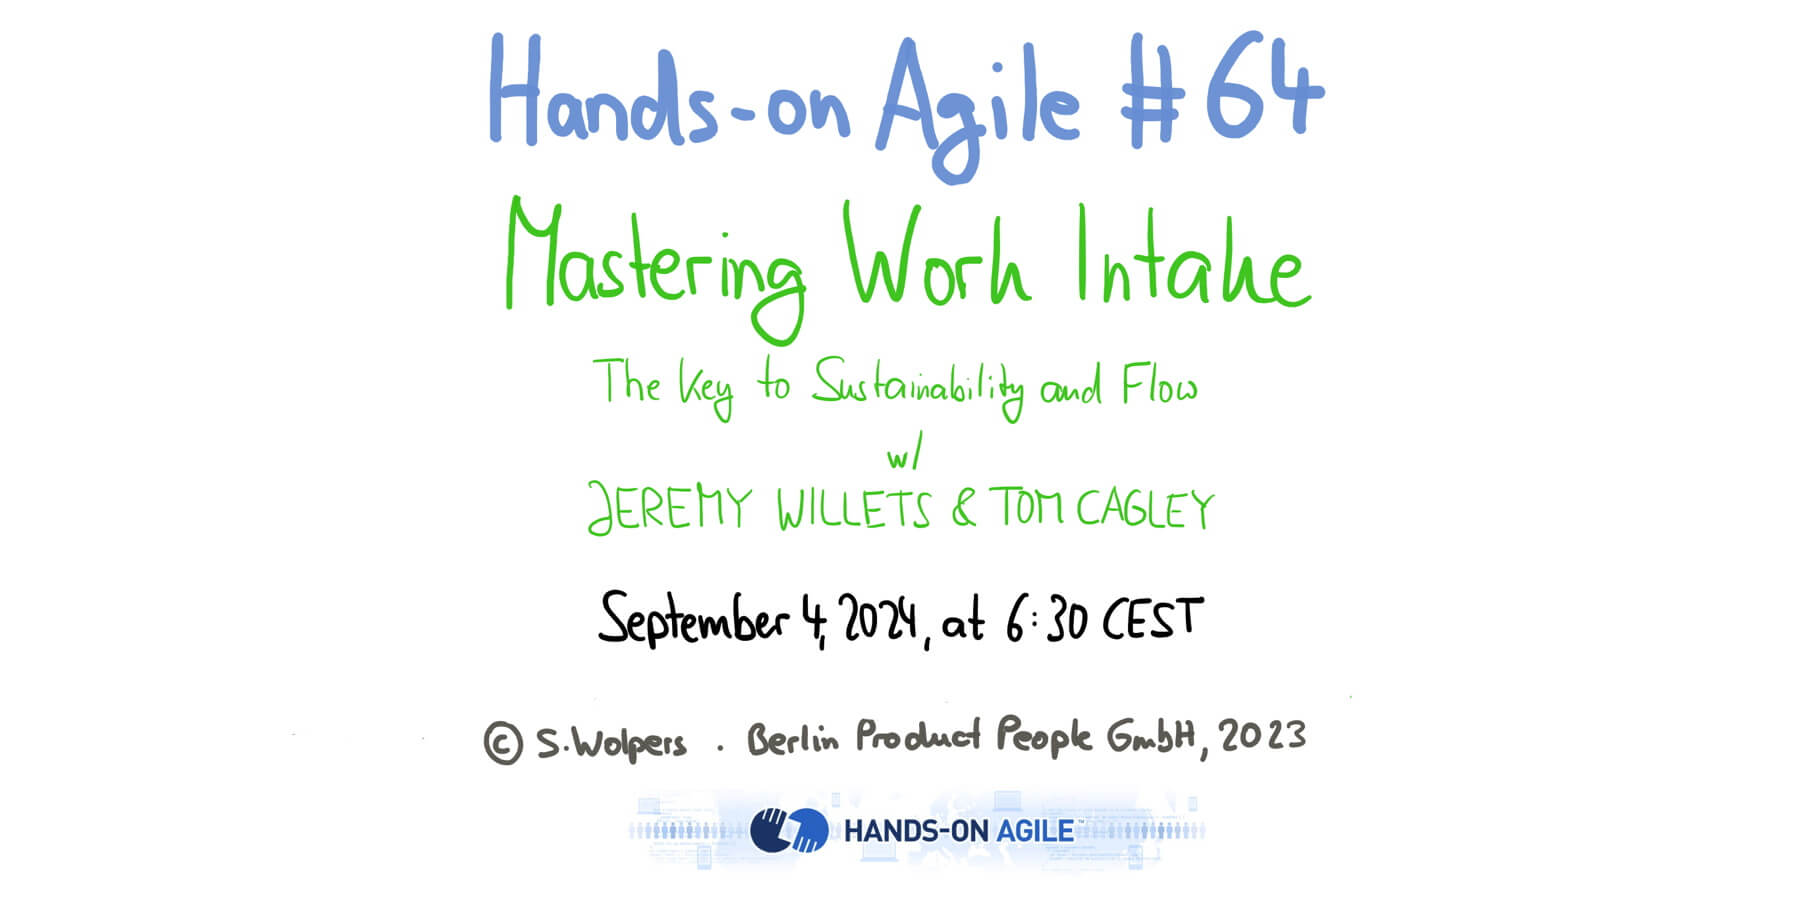 Hands-on Agile 64: Mastering Work Intake: The Key to Sustainability and Flow w/ Jeremy Willets and Tom Cagley — September 4, 2024 — Berlin-Product-People.com